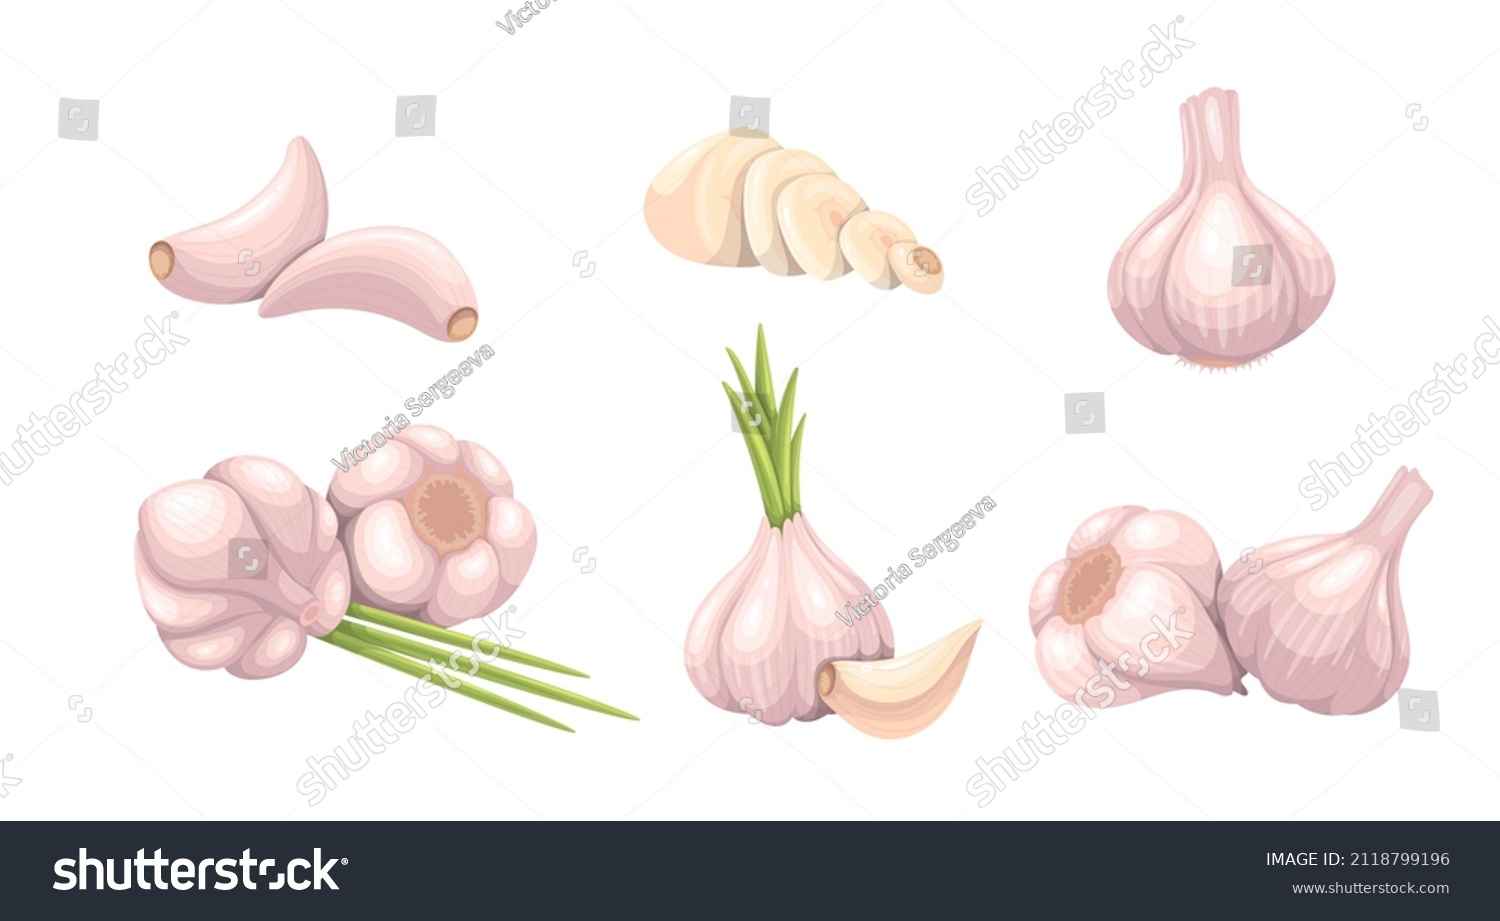 Garlic set, vegetable vector illustration. Whole heads, heaps whole and sliced garlic cloves. Common seasoning worldwide, spice and food flavoring. #2118799196